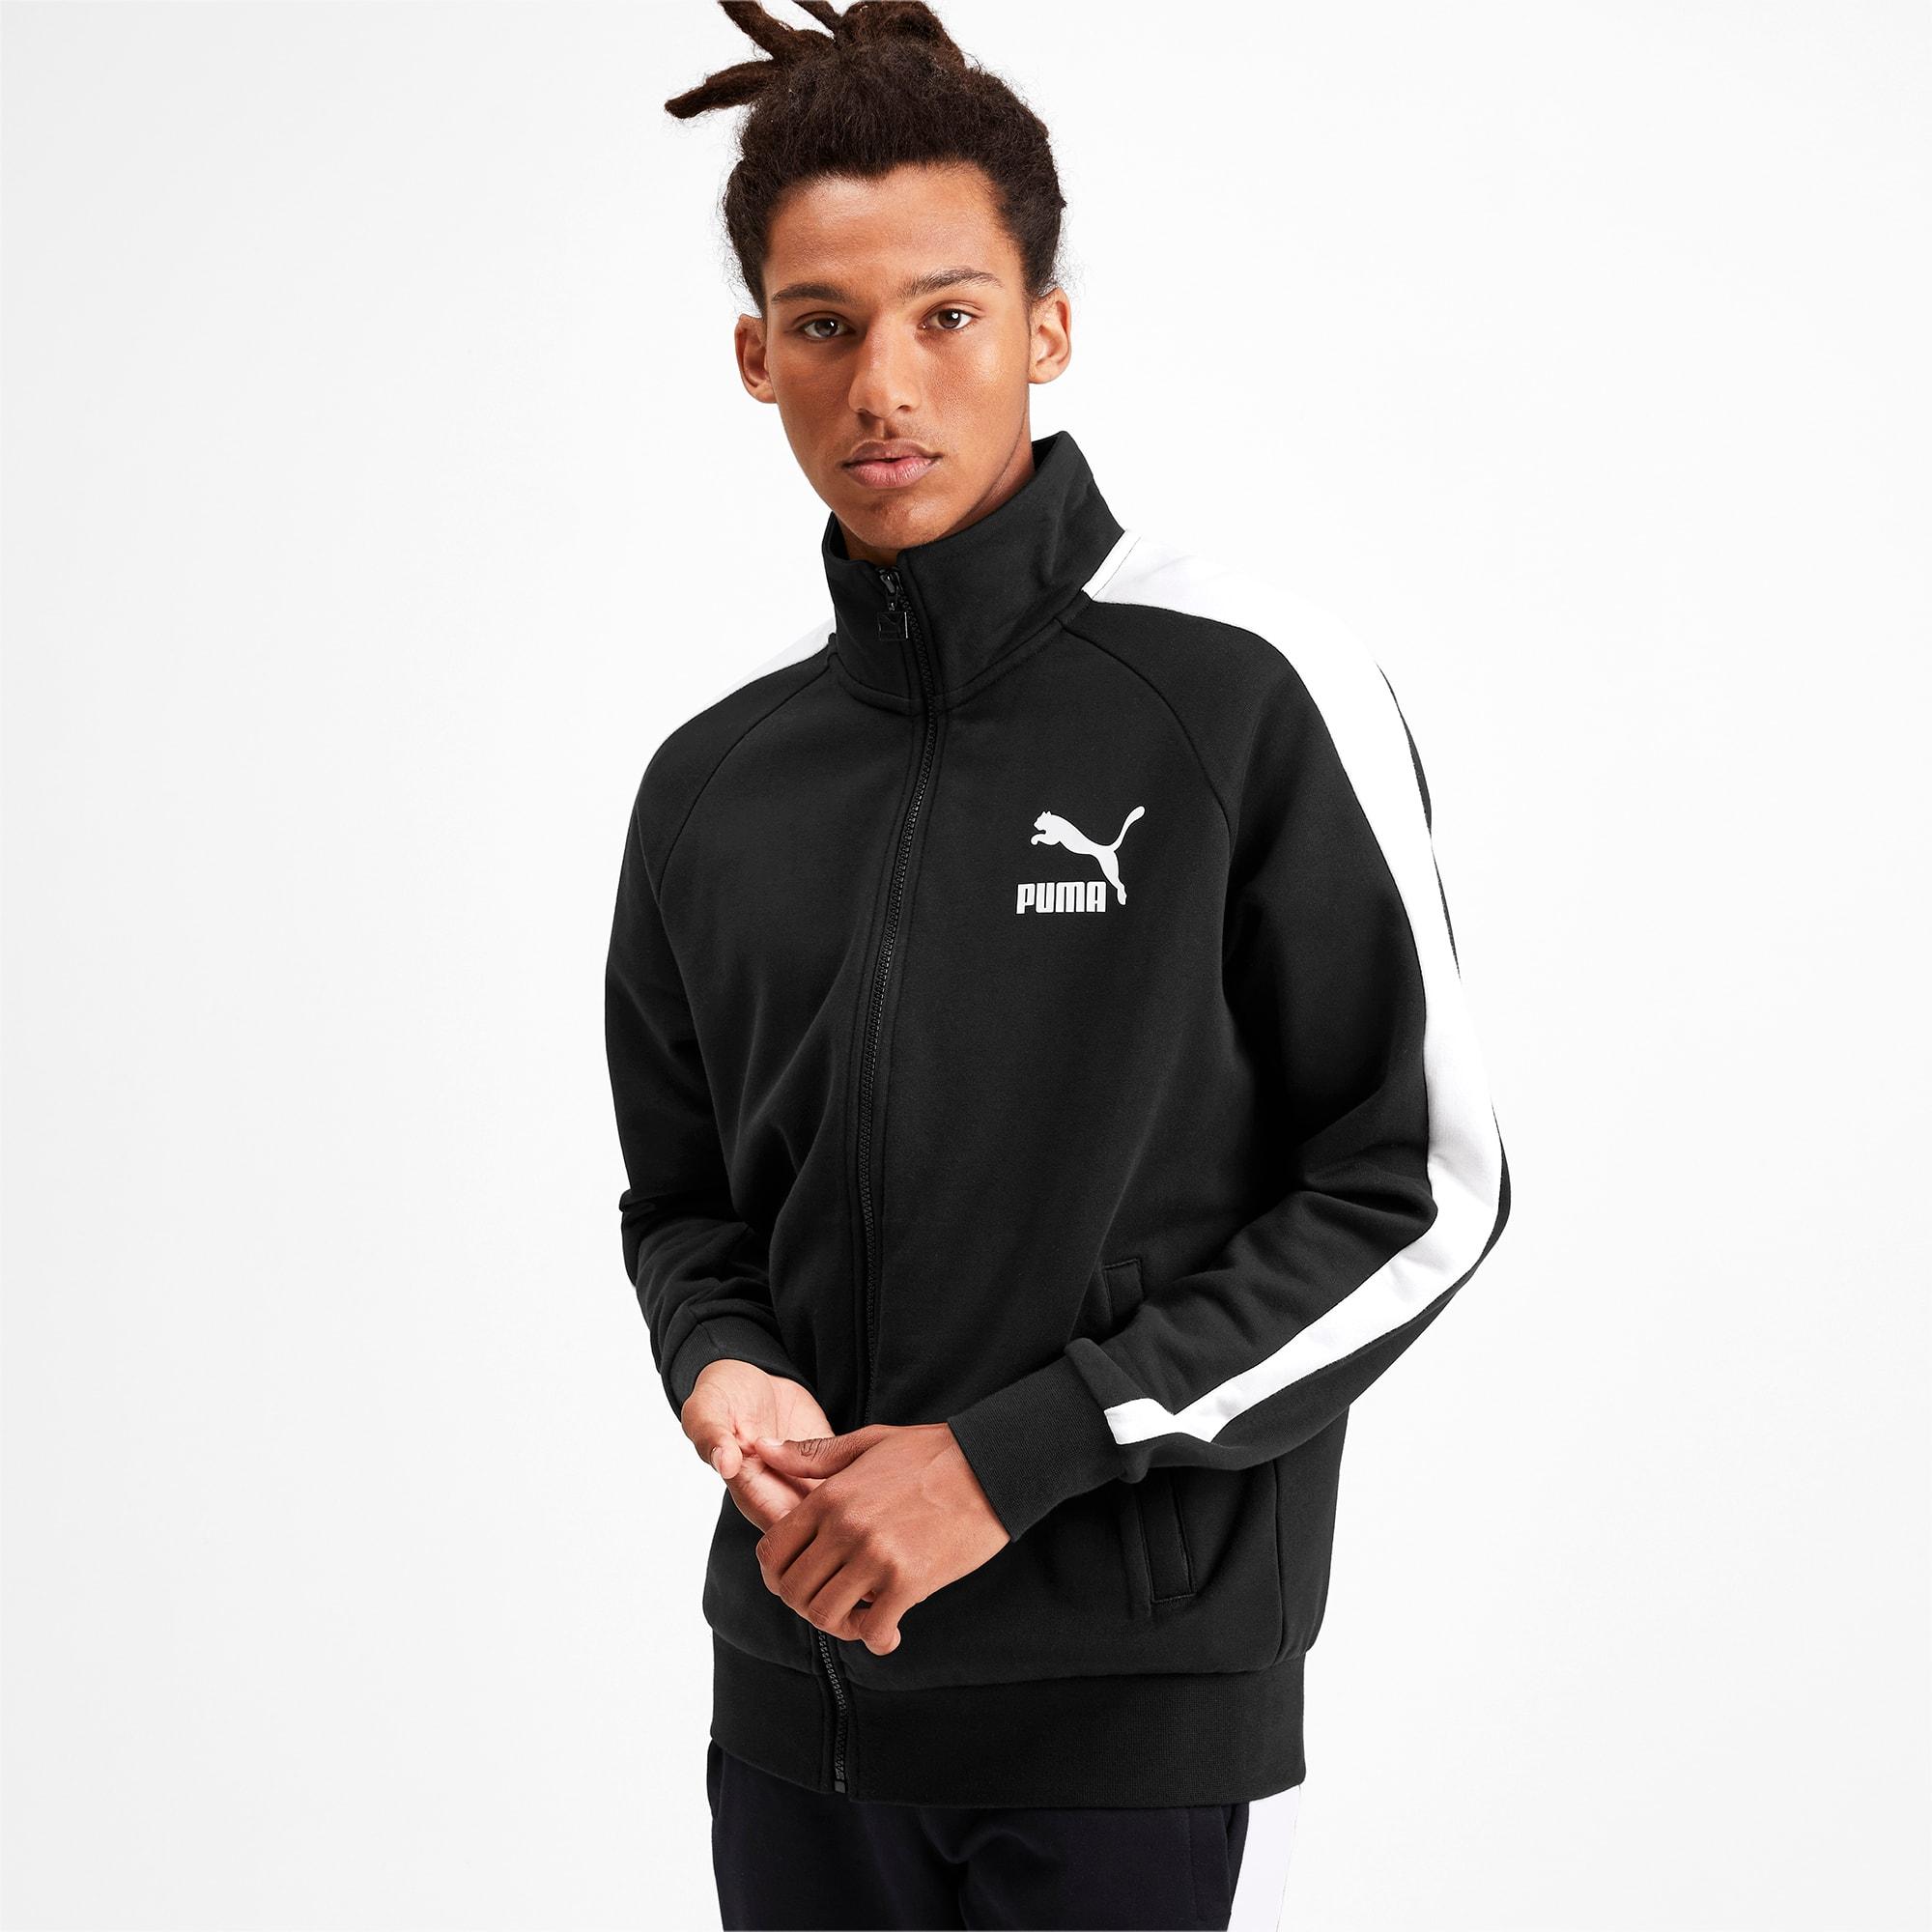 PUMA Cotton Iconic T7 Men's Track Jacket in 01 (Black) for Men - Lyst